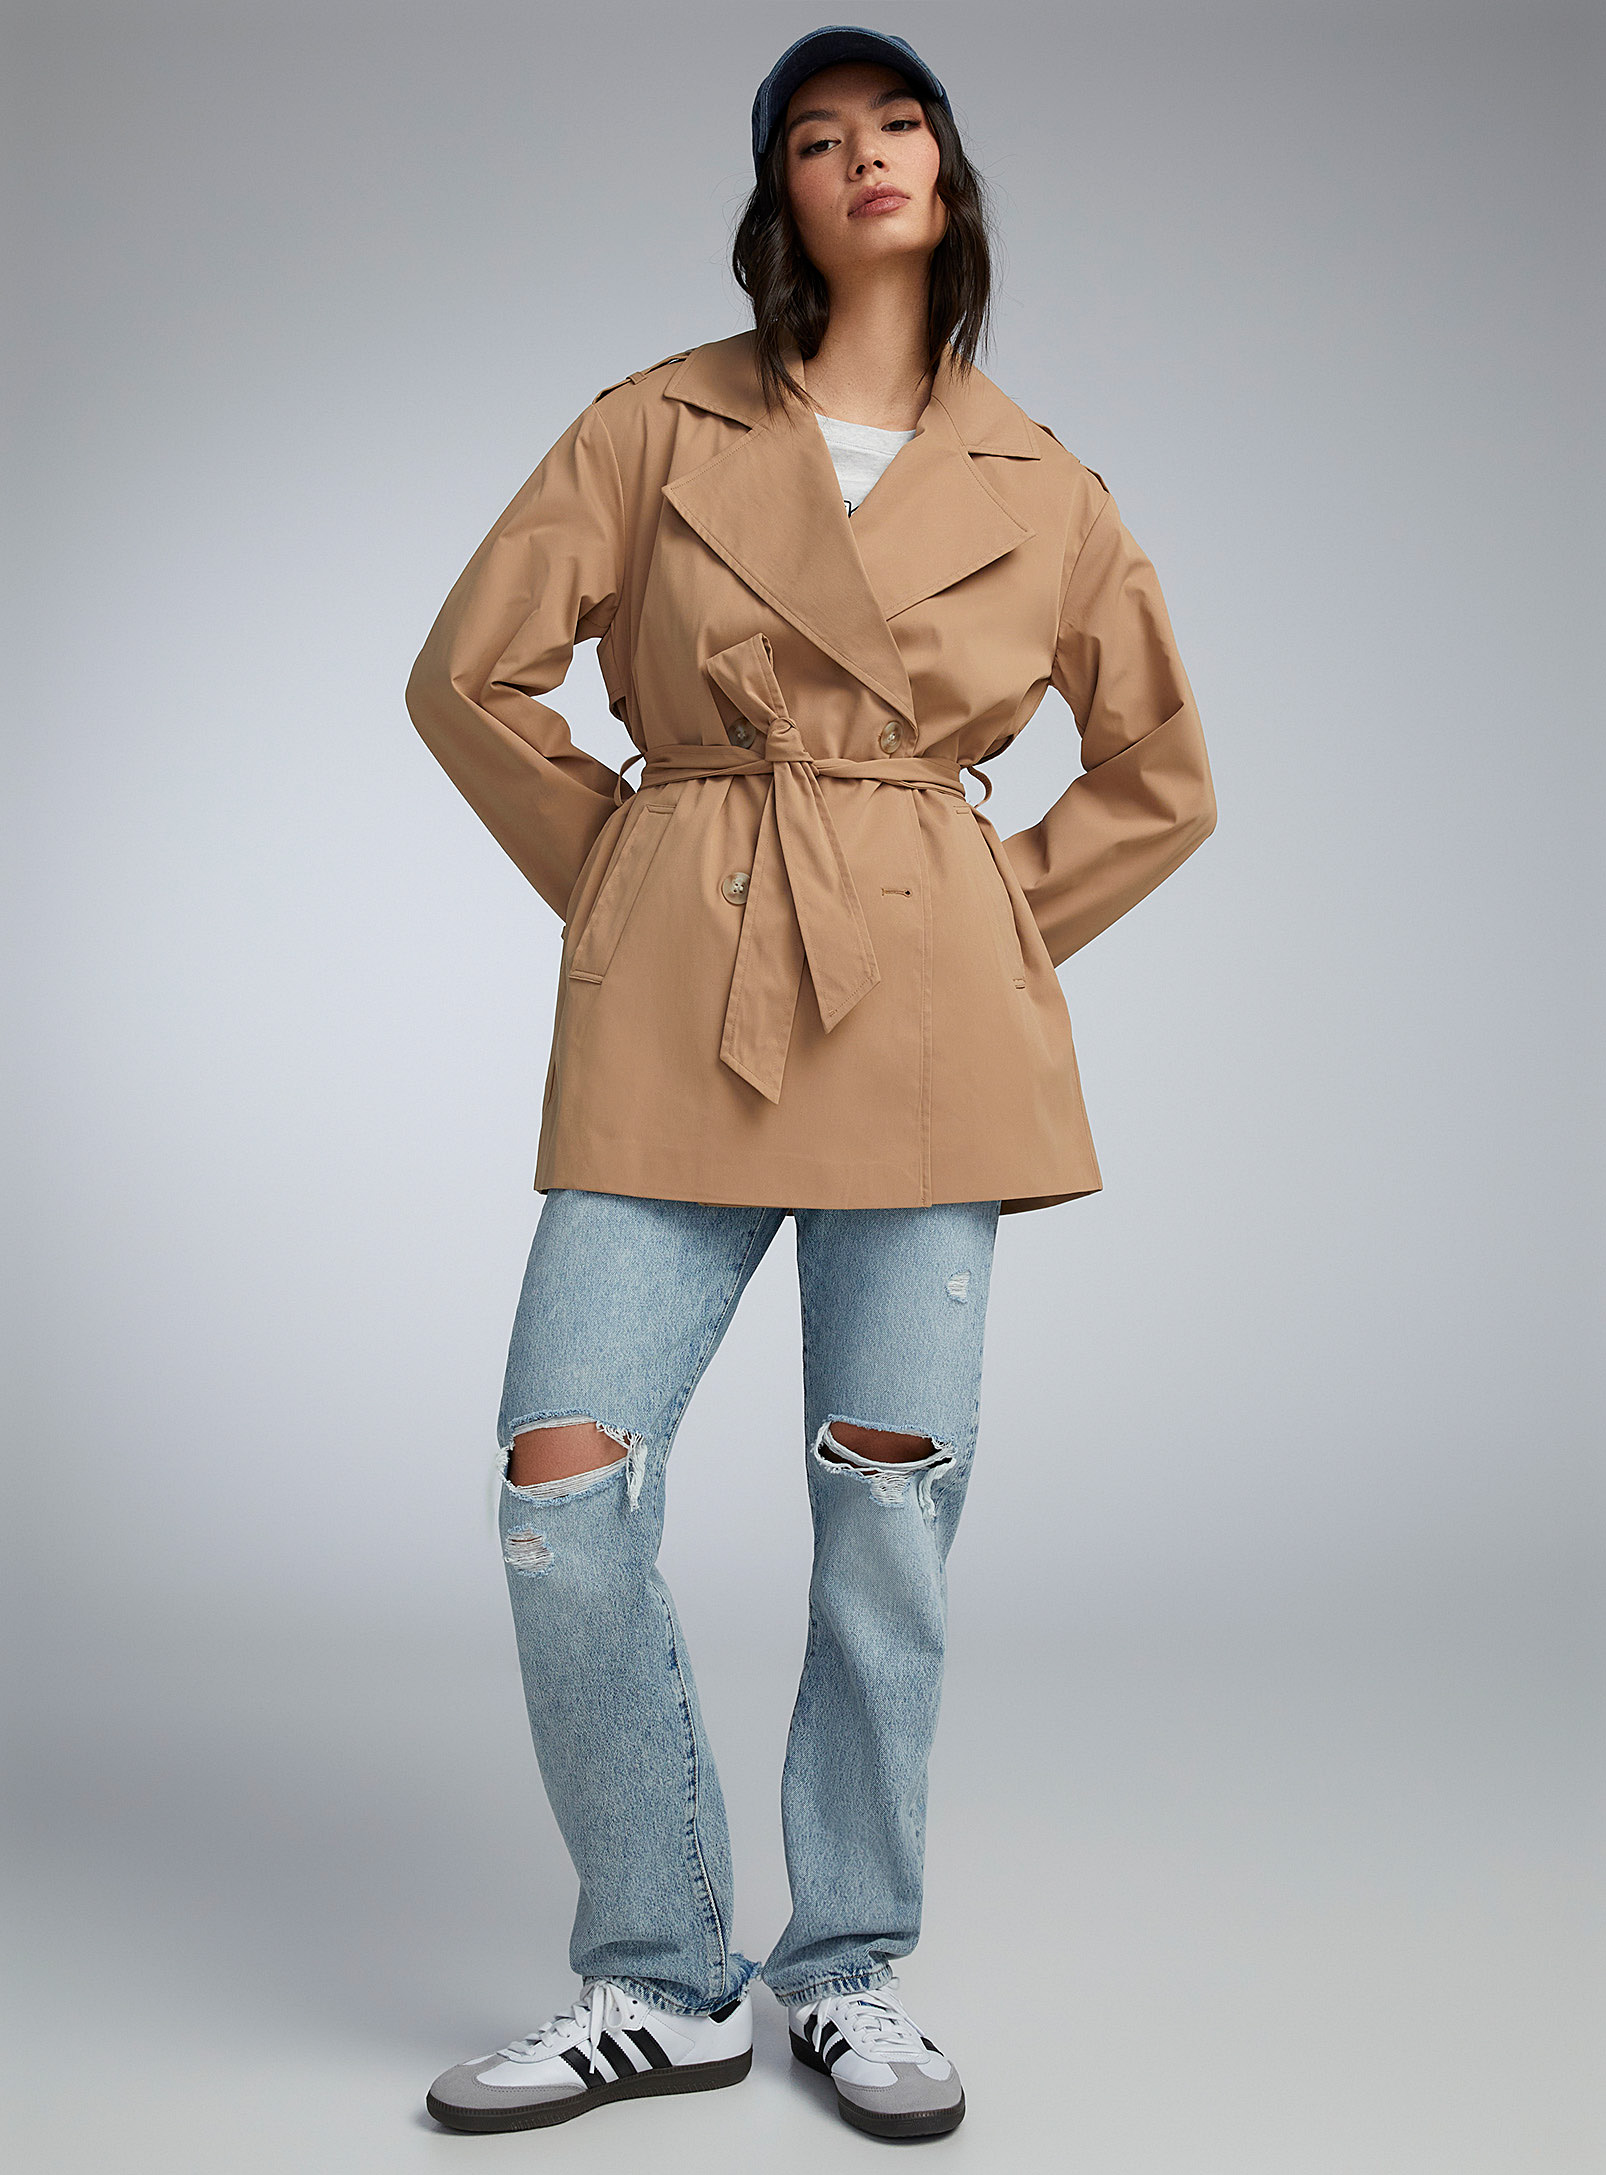 Only - Women's Beige double-breasted trench coat